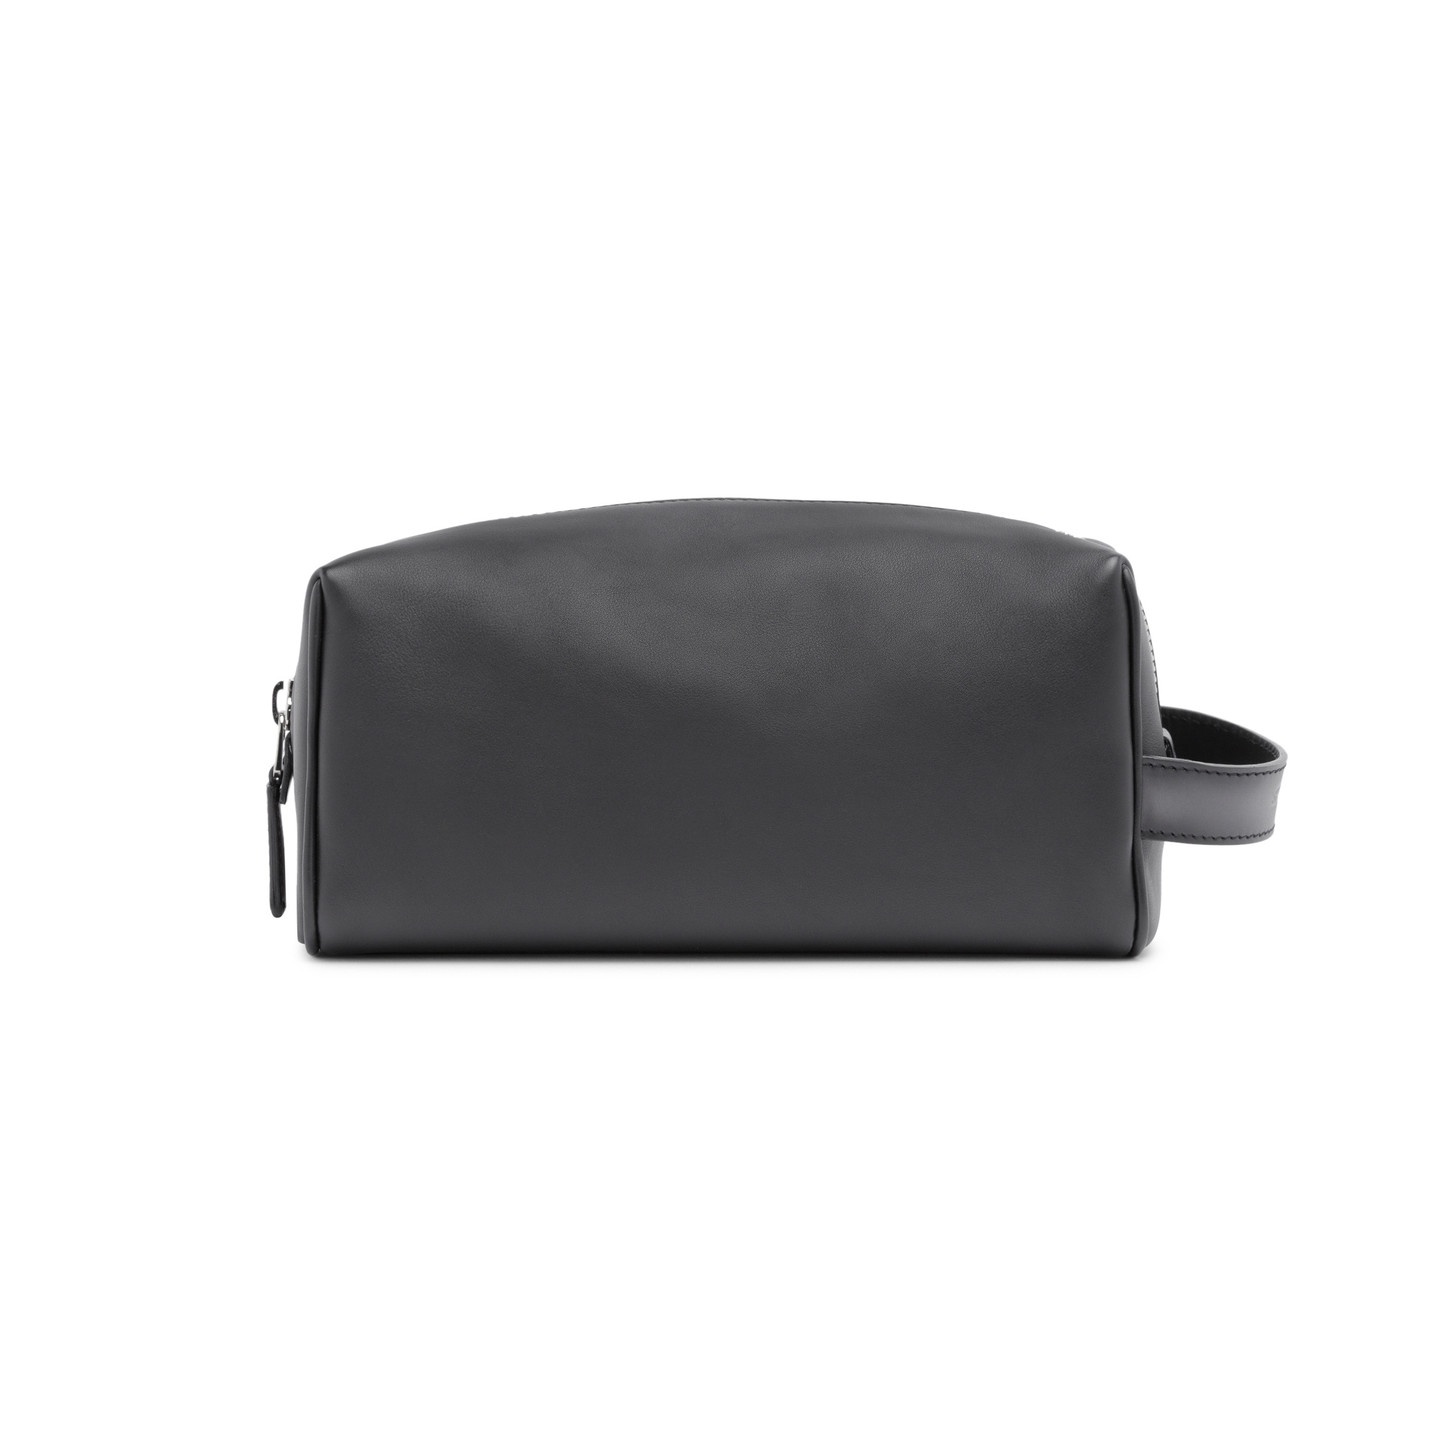 Black leather pouch - 1